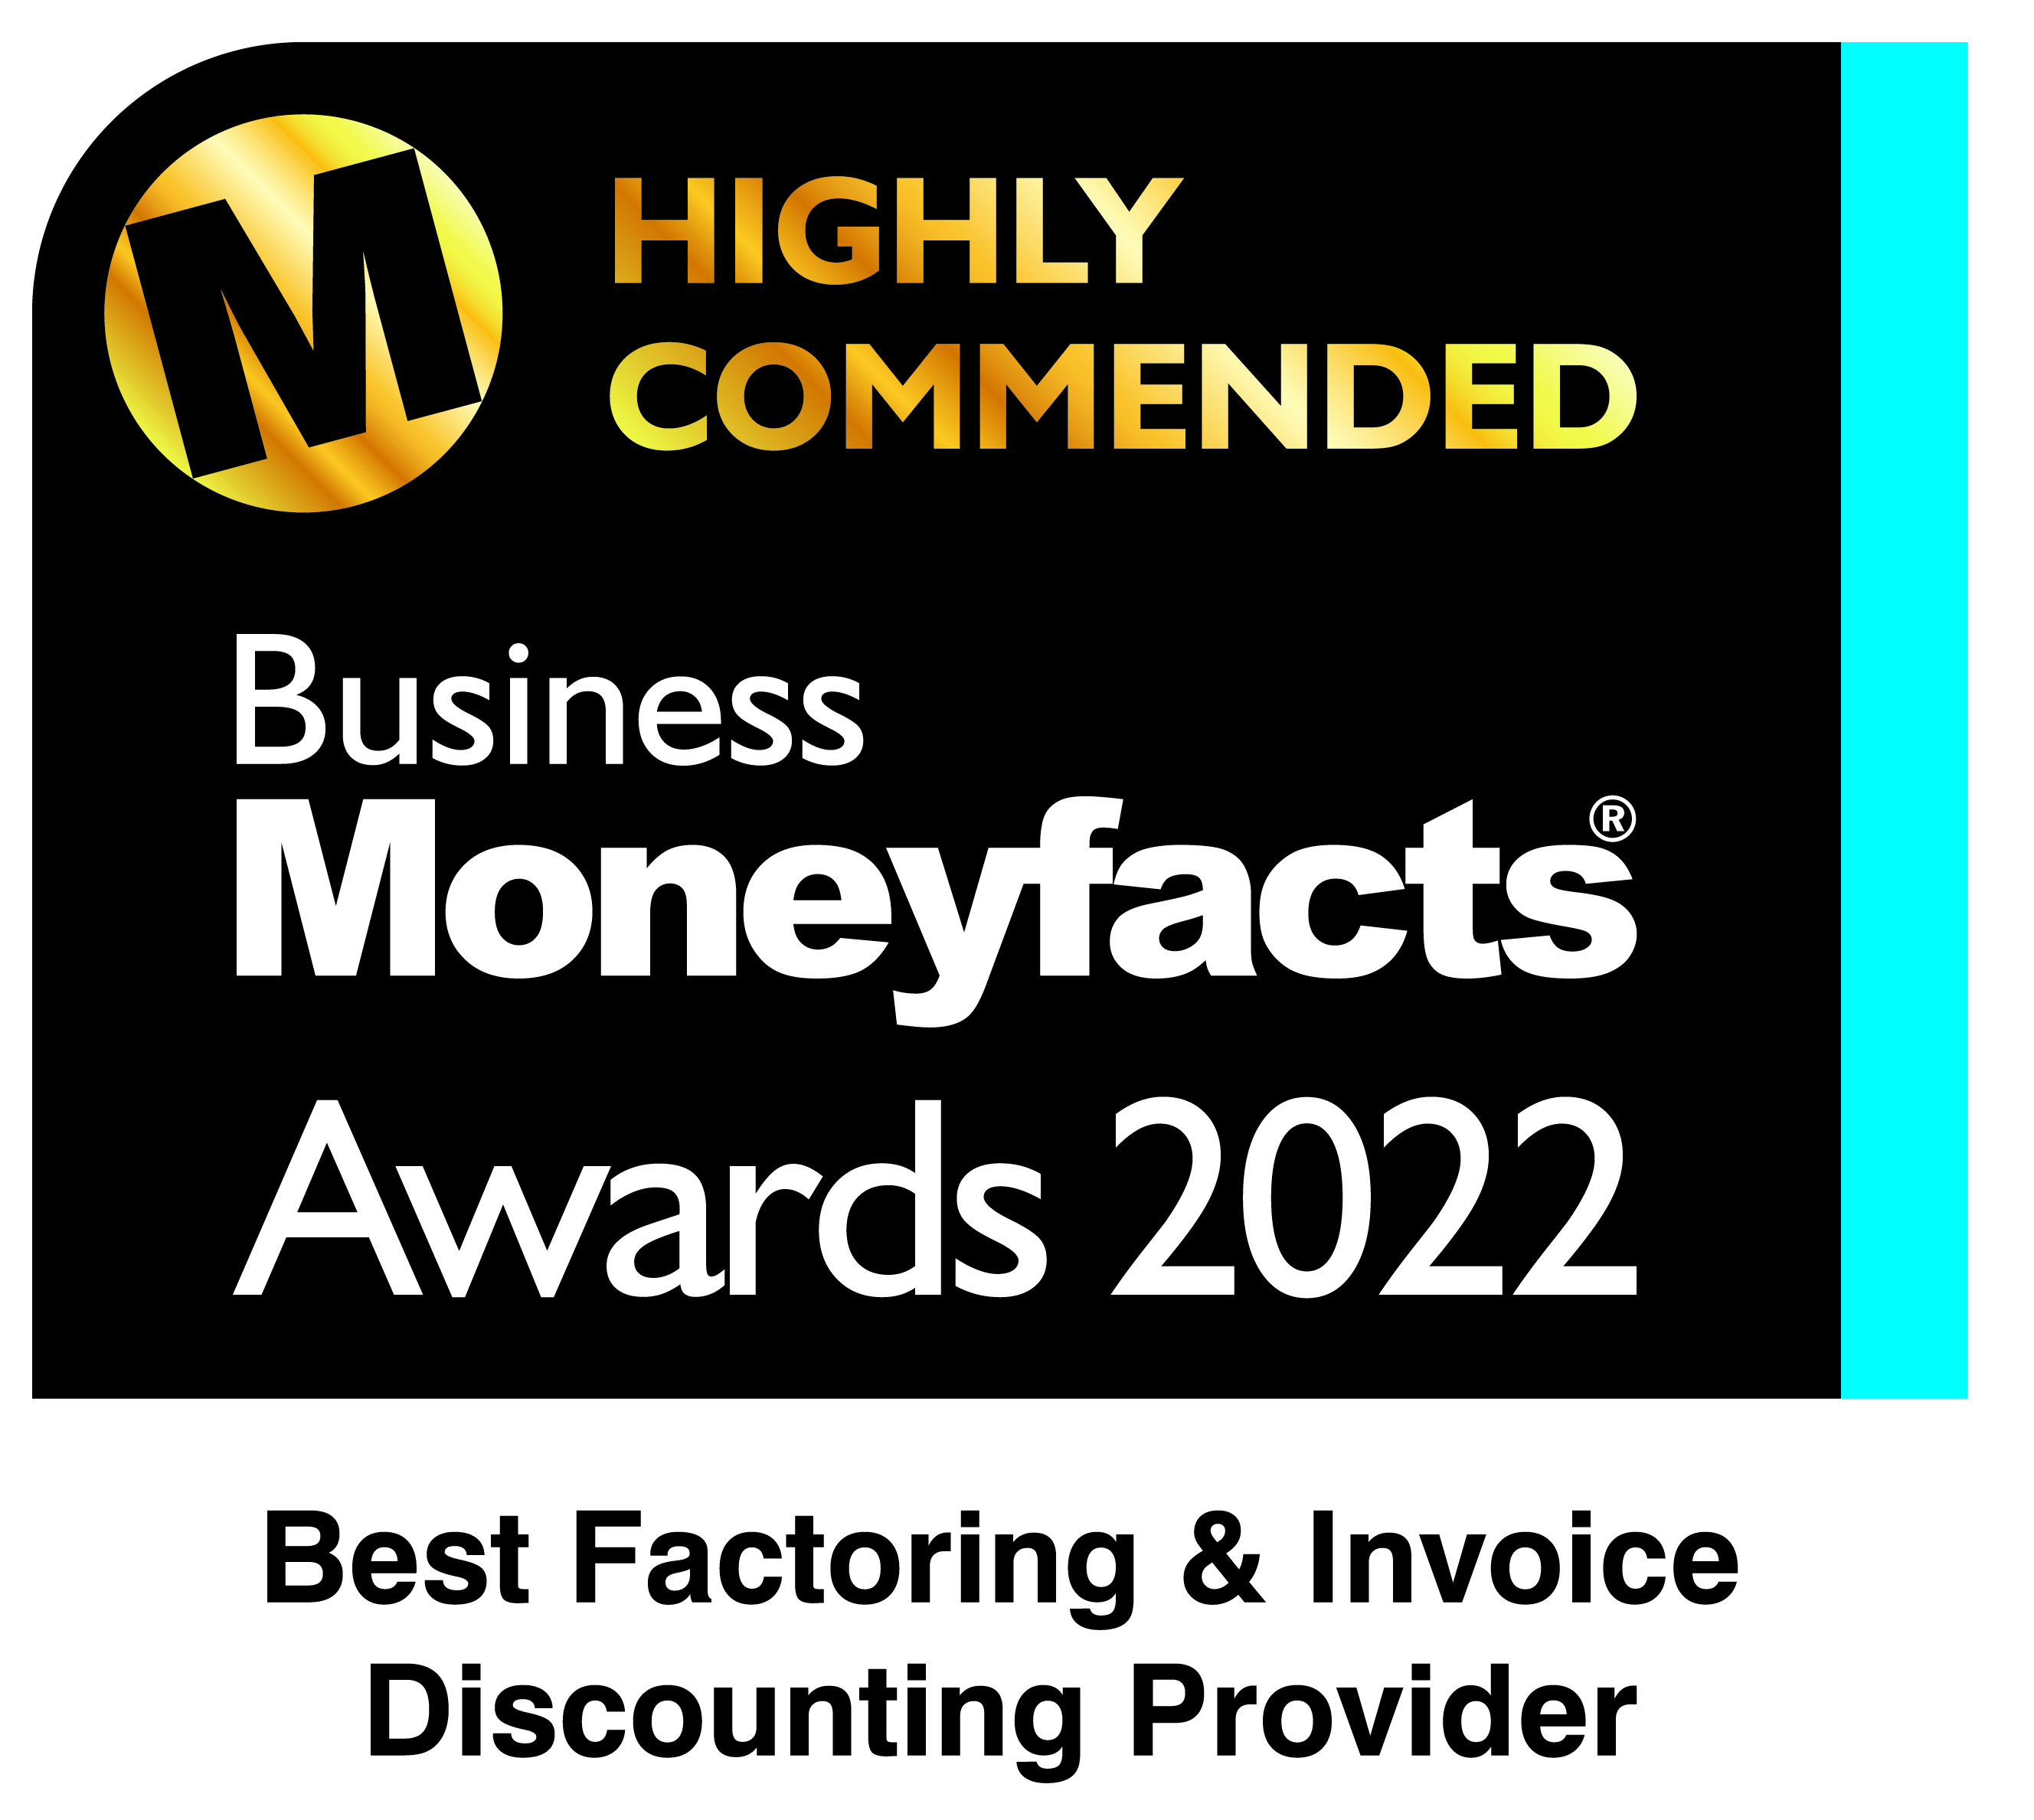 Highly Commended Provider 2022